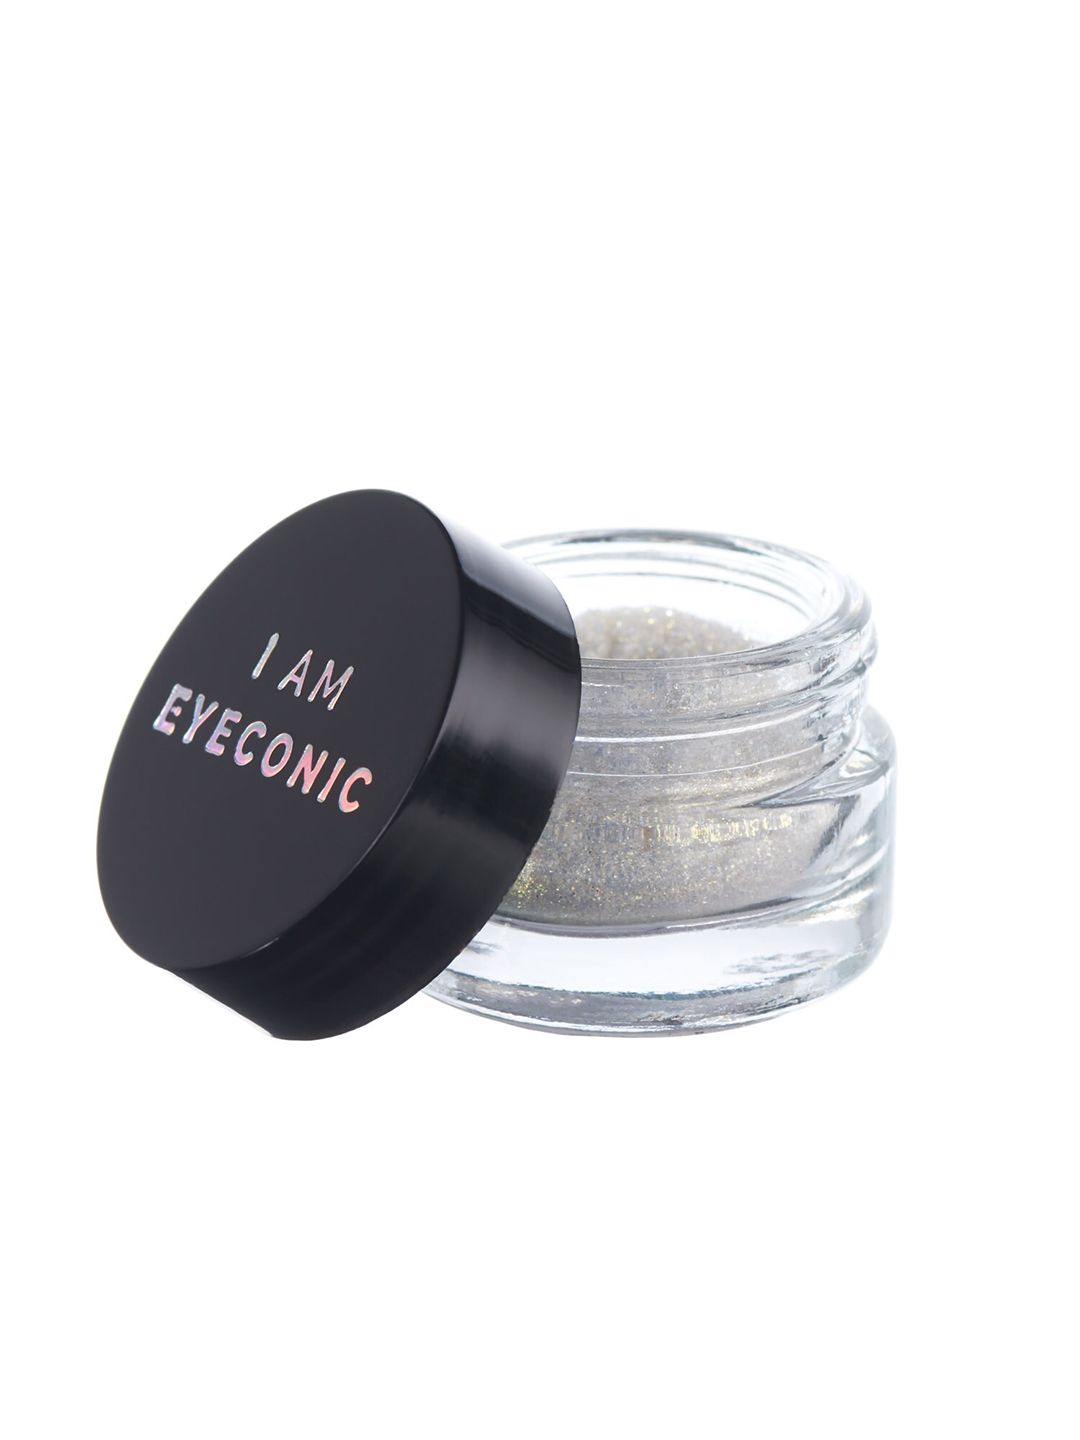 I AM EYECONIC Duo Chrome Pigments Eyeshadow - I Mean Price in India